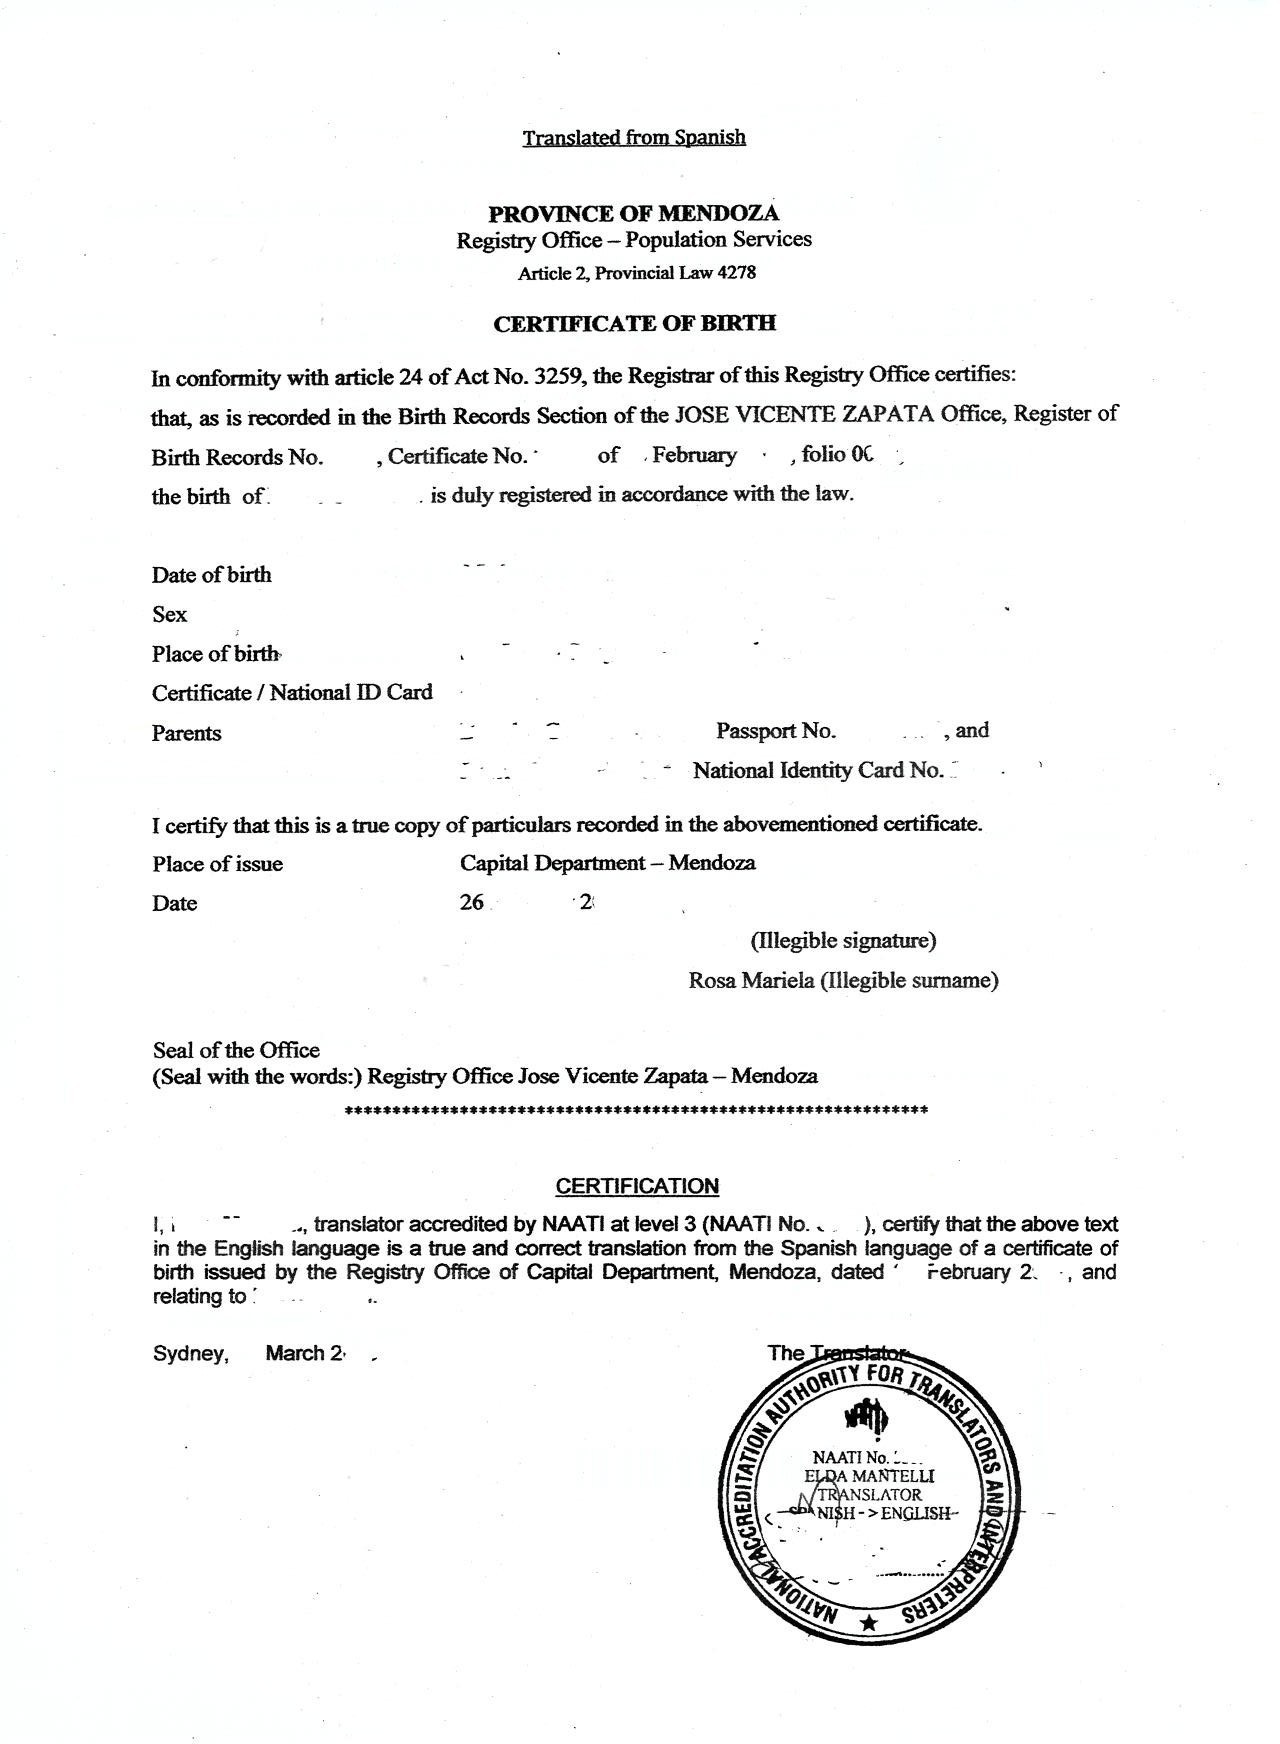 Death Certificate Translation Template Spanish To English Sample Free Birth From